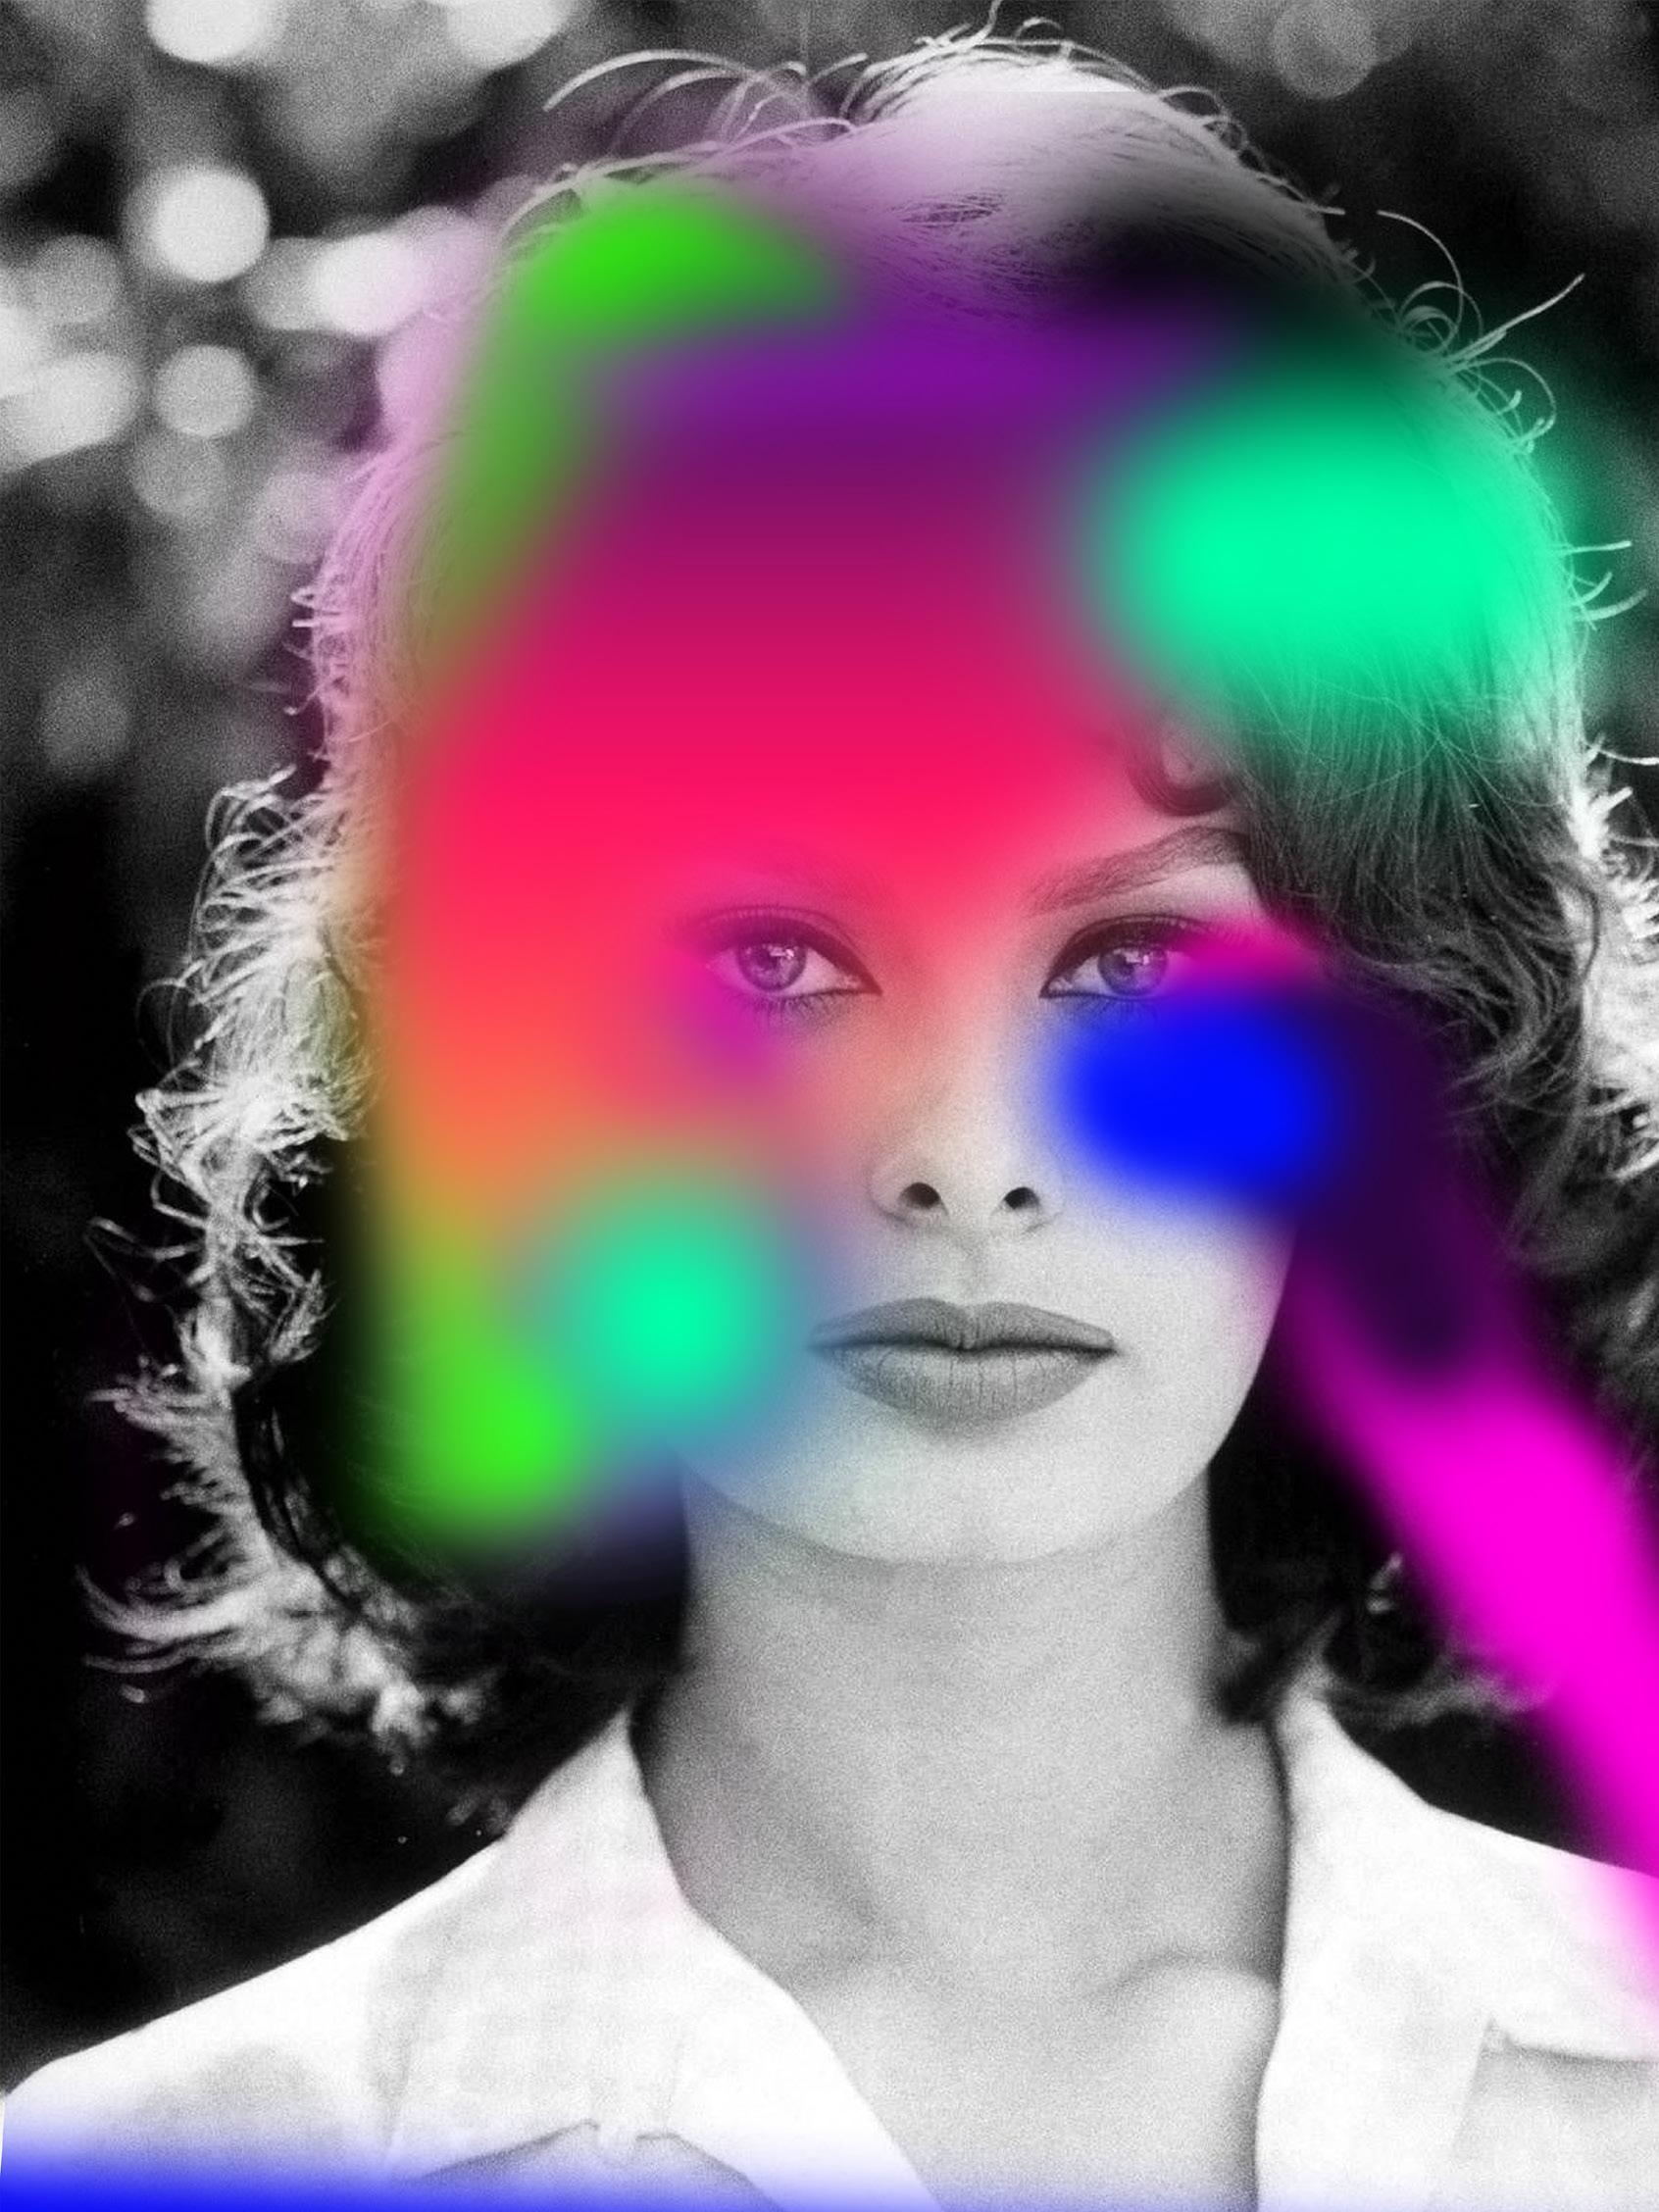 Art by the Dutch artist Erwin Thomasse (1972) was recently featered in an exhibition at and bought by the Van Abbemuseum. 

This piece is one of the series Aura, actresses, Sophia Loren.

Sofia Villani Scicolone Dame Grand Cross OMRI  (born 20